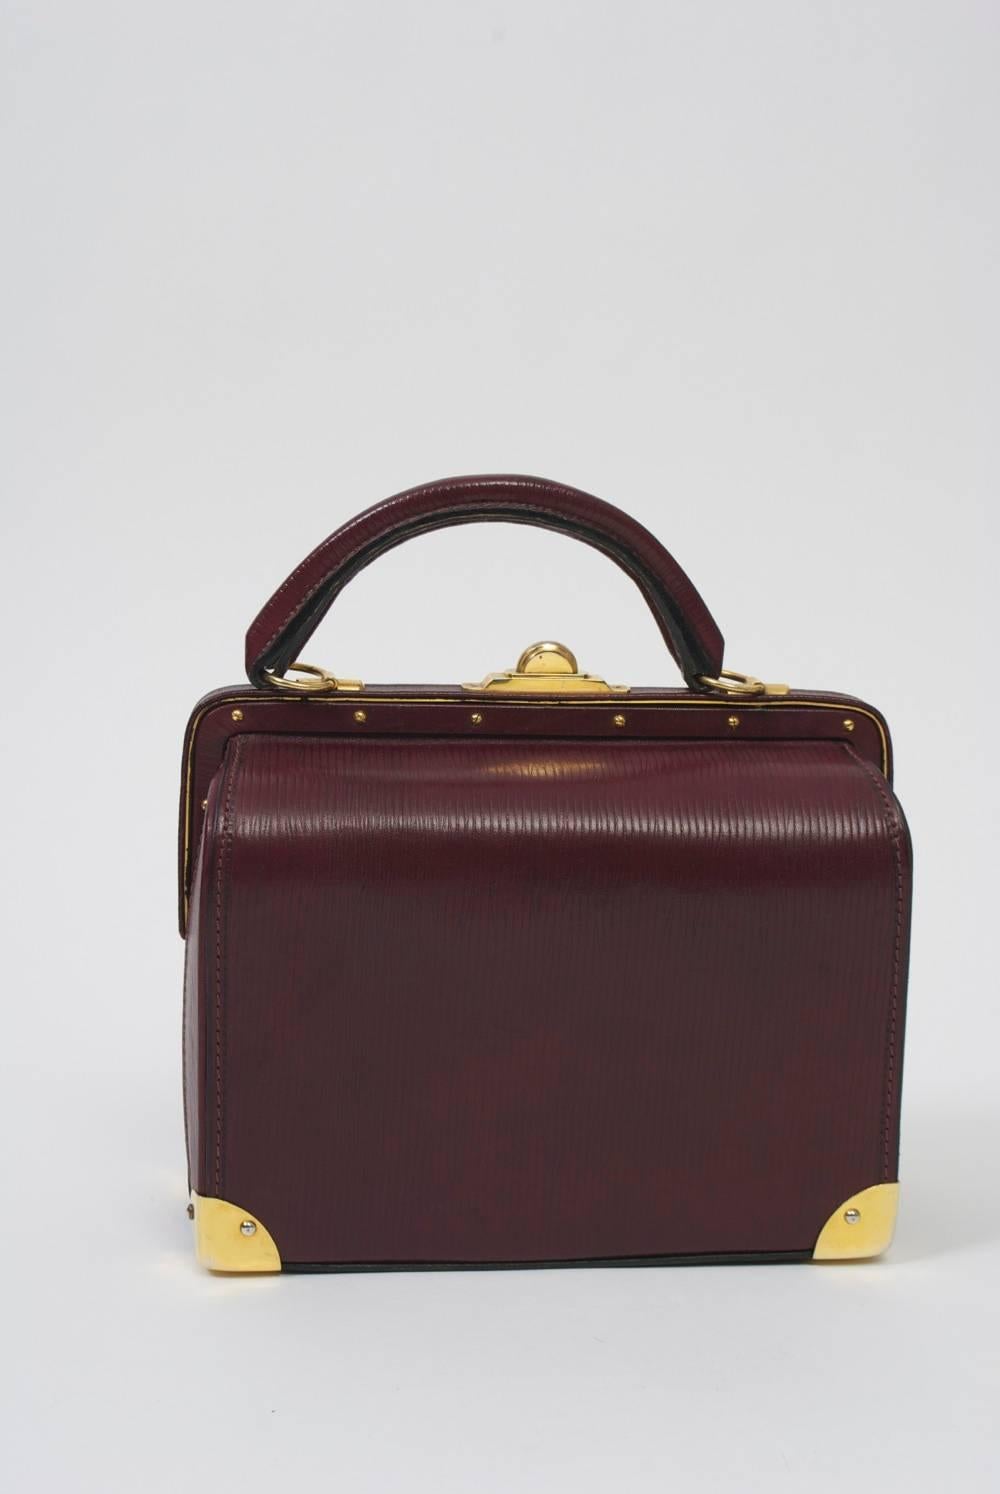 Impressive doctor's style satchel by Roberta di Camerino in a rich dark plum leather that has a striated texture. The structured handbag features unique hardware in polished gold metal, which include the slide-up and pull closures on the exterior